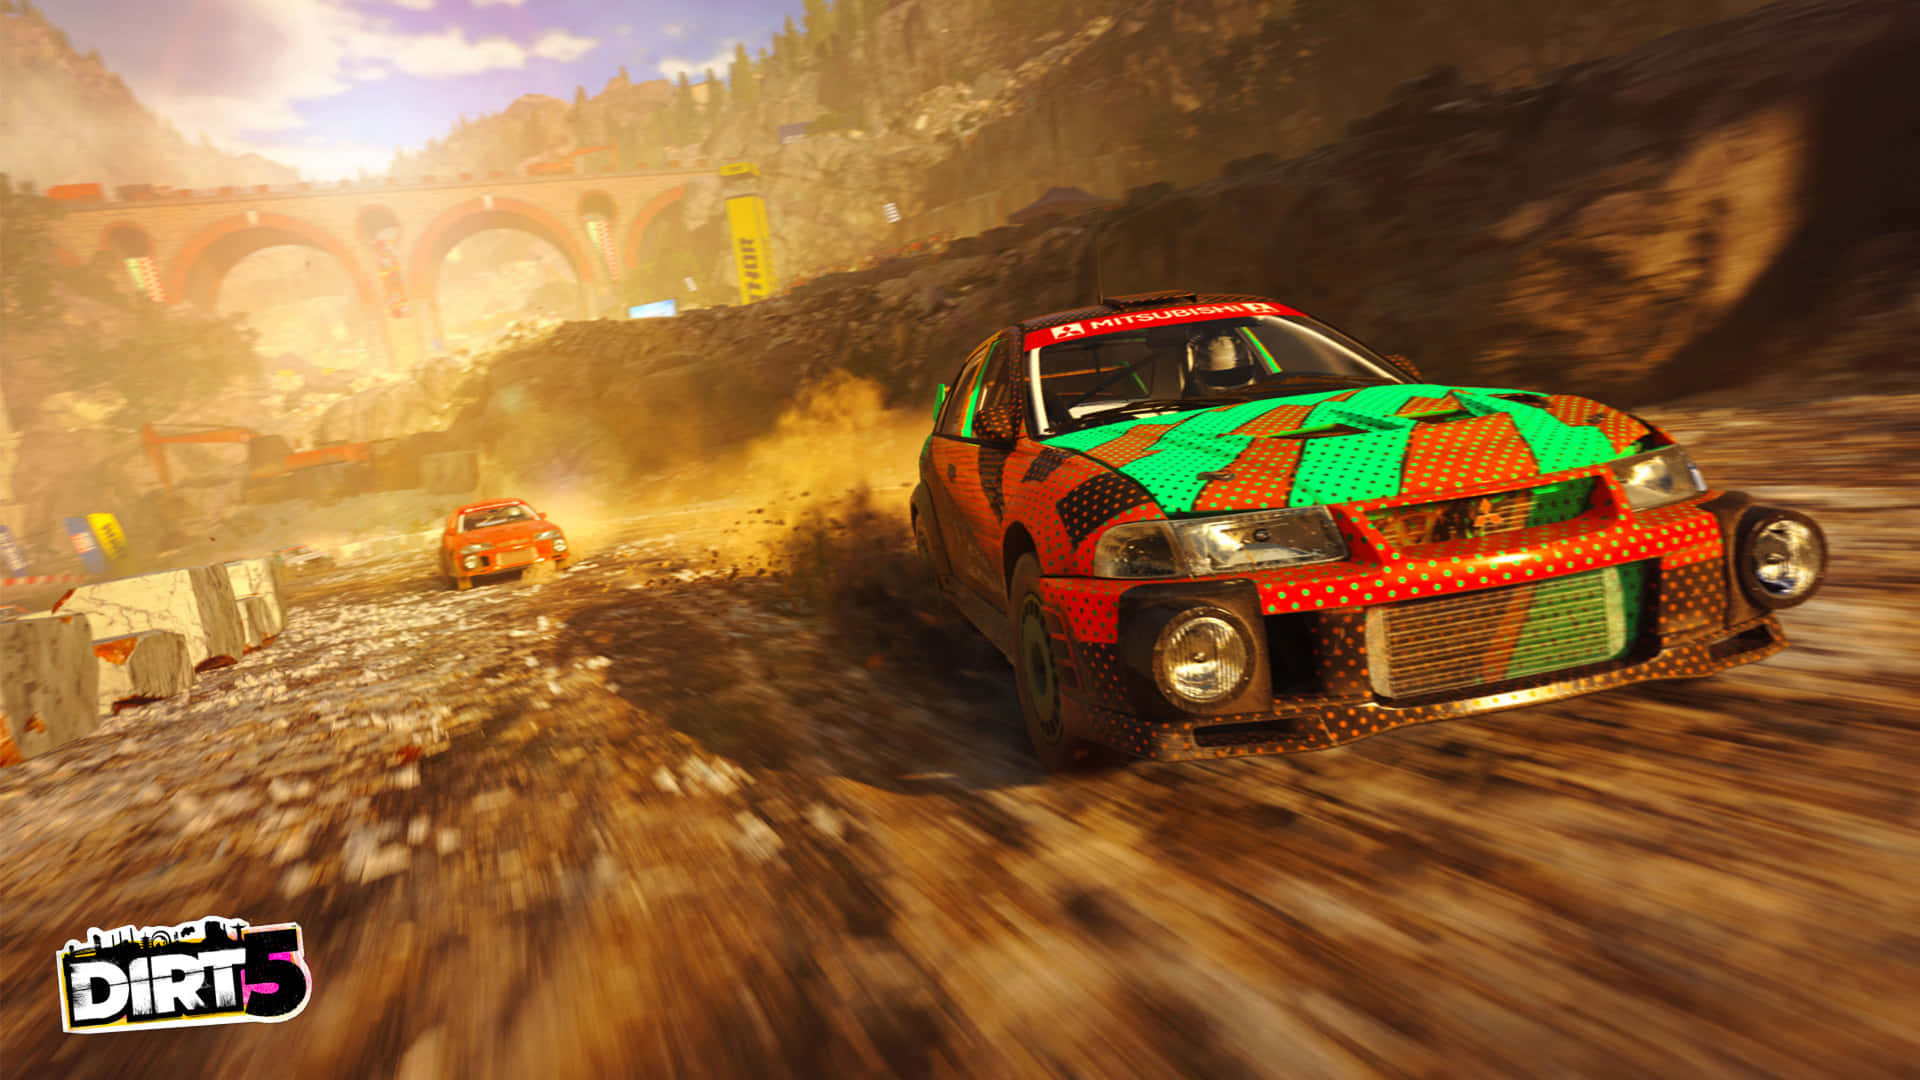 8krally Dirt 5 Would Be Translated To Spanish As 